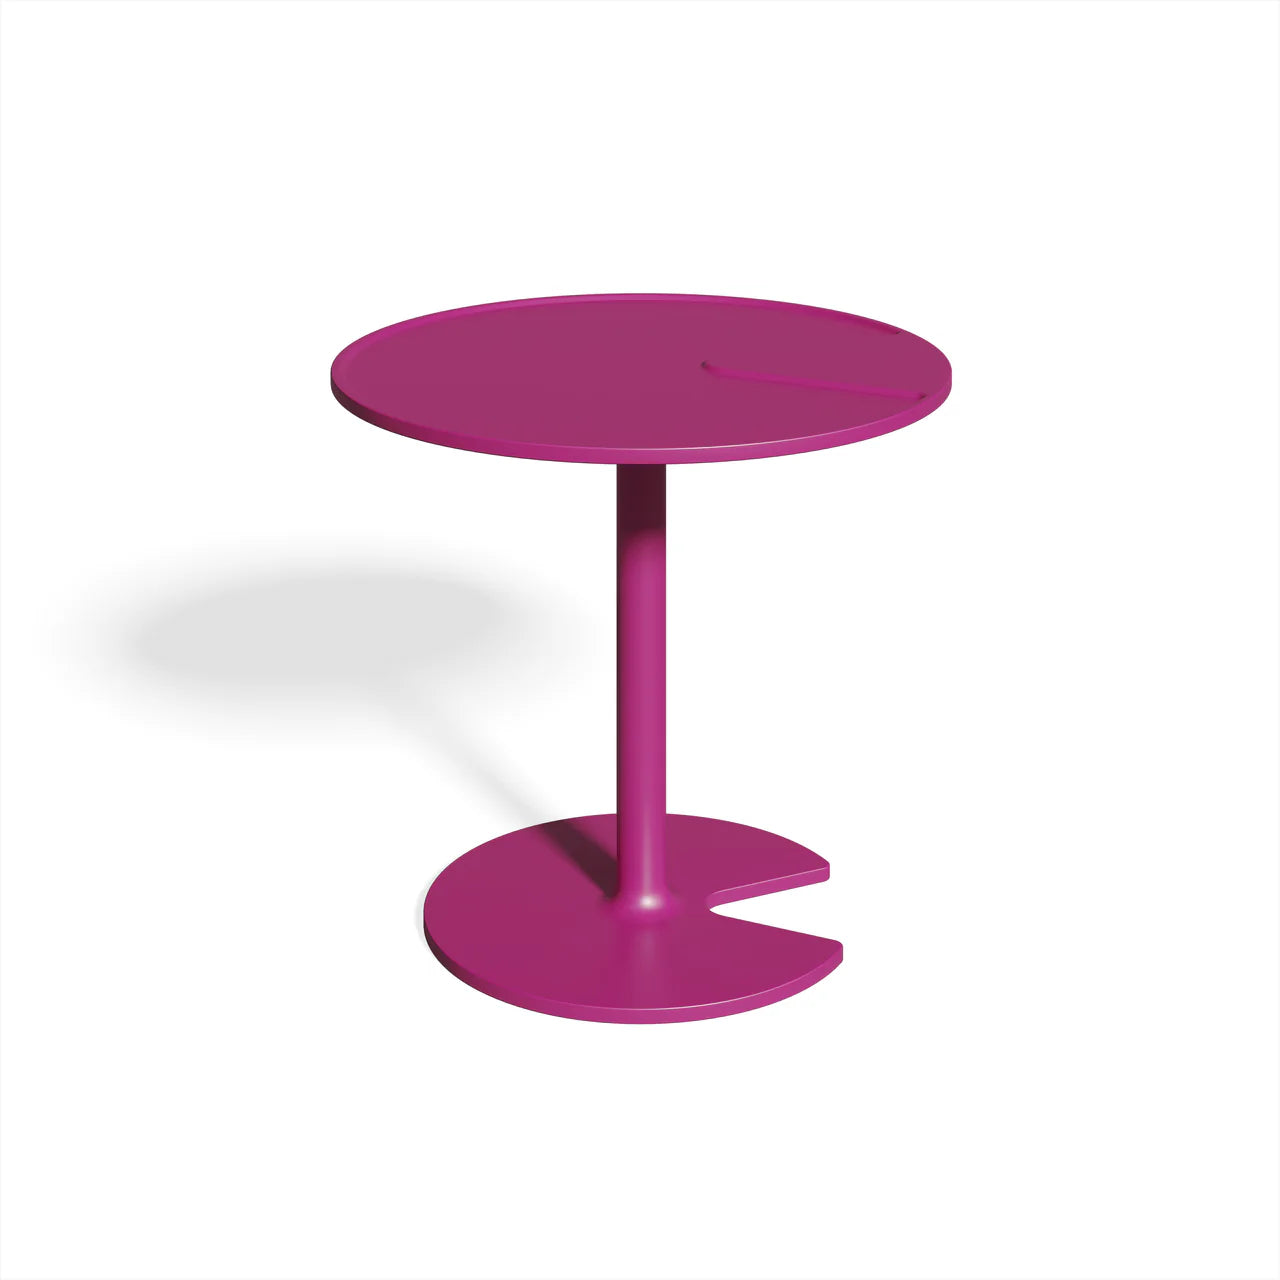 side table by Möbelsohn in magenta on white background